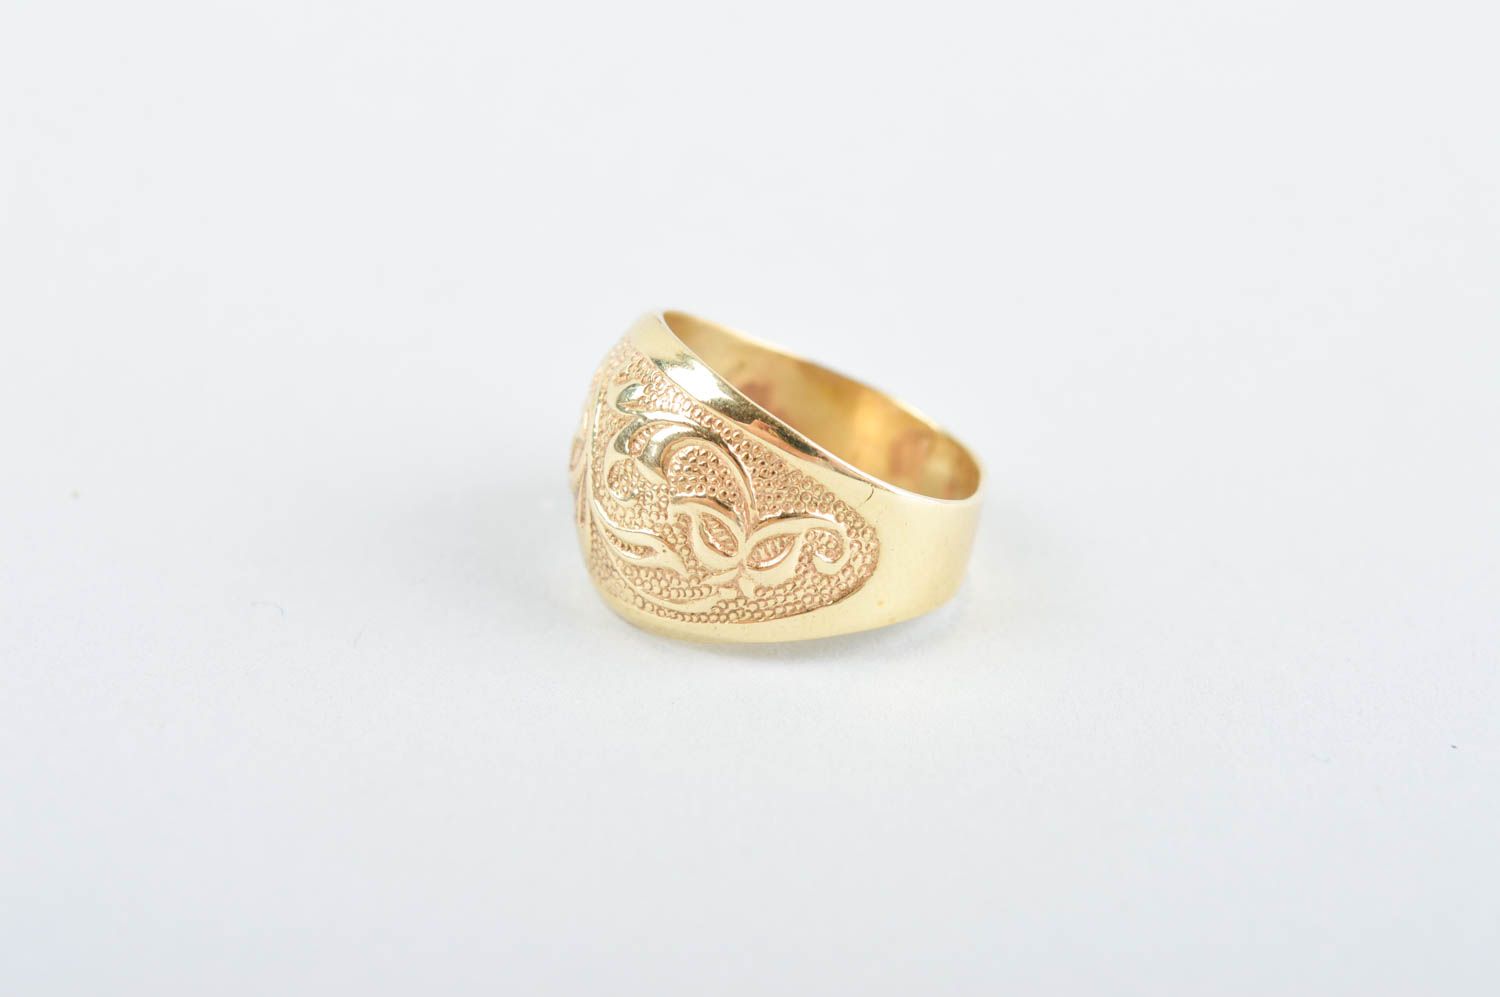 Beautiful handmade metal ring patterned brass ring cool metal jewelry ideas photo 2